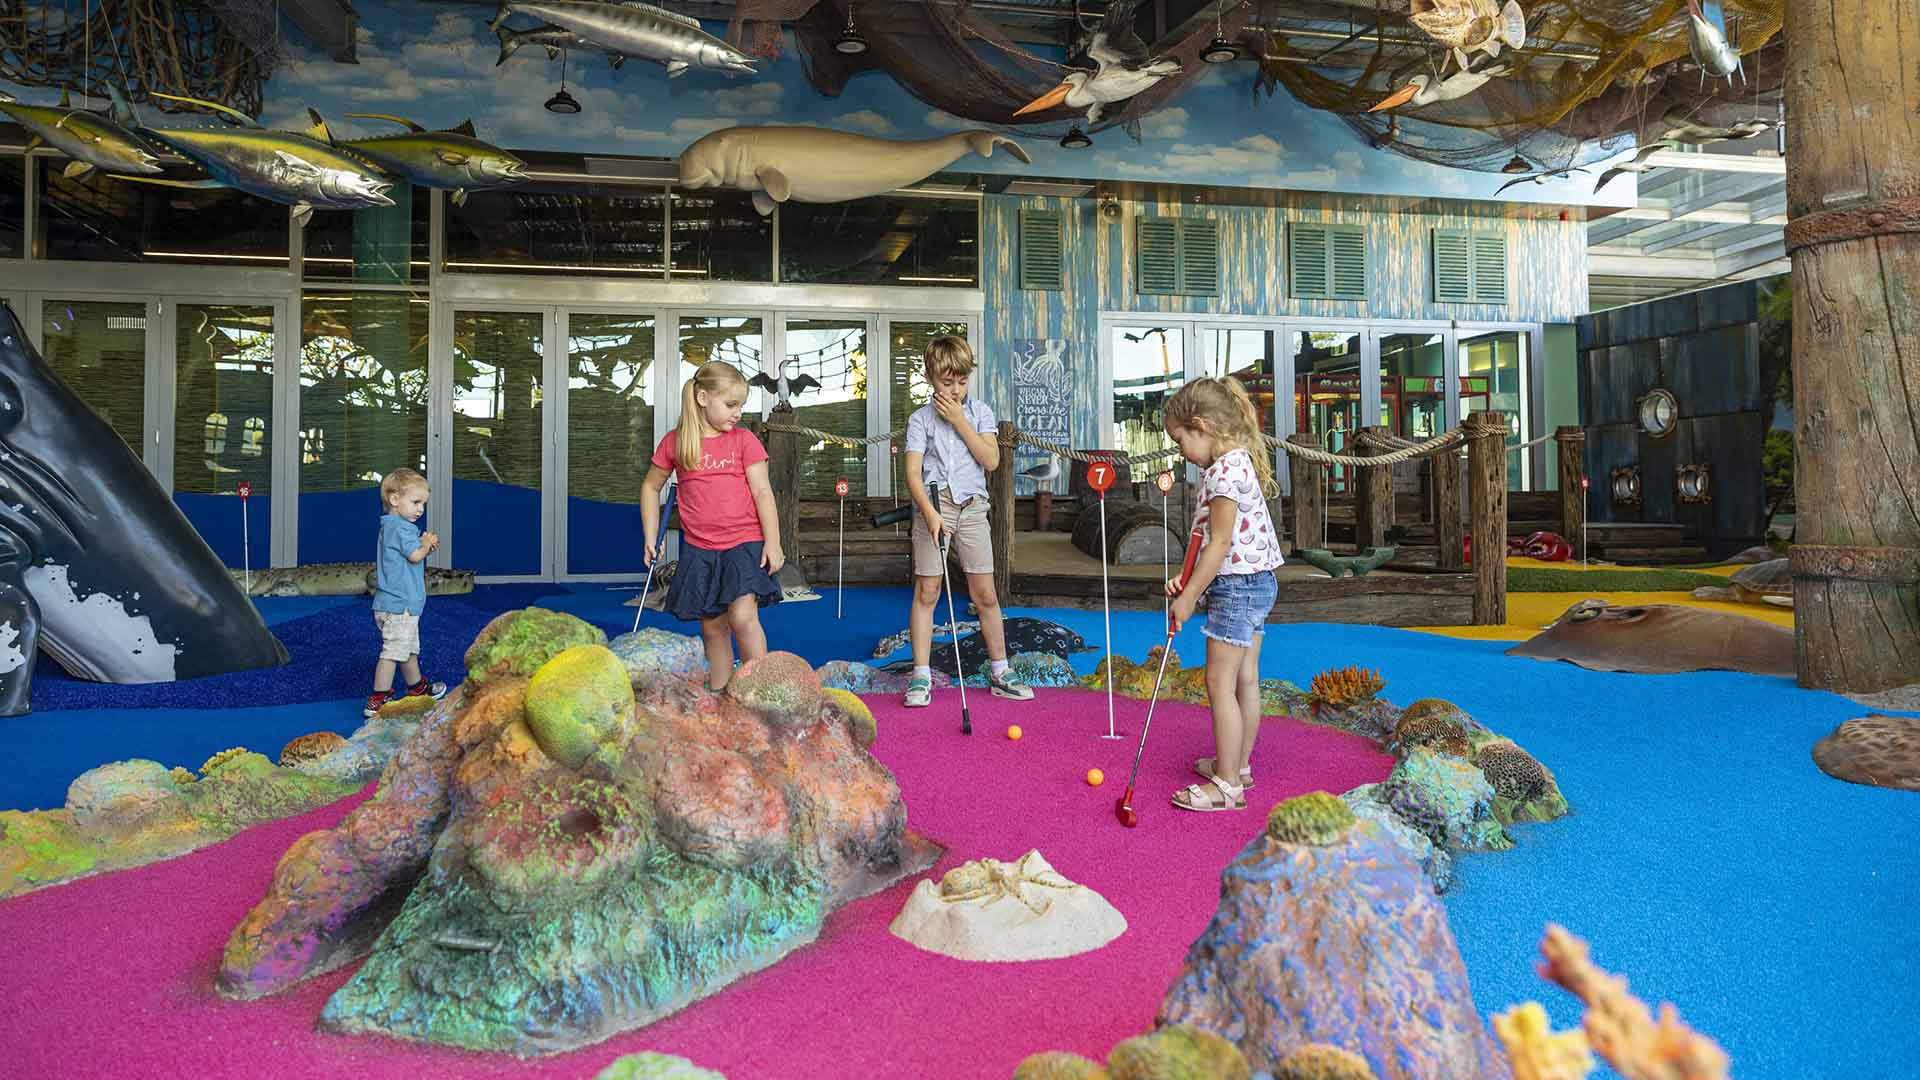 Undersea Putt & Play Is Redcliffe's New Underwater-Themed 18-Hole Mini Golf Course